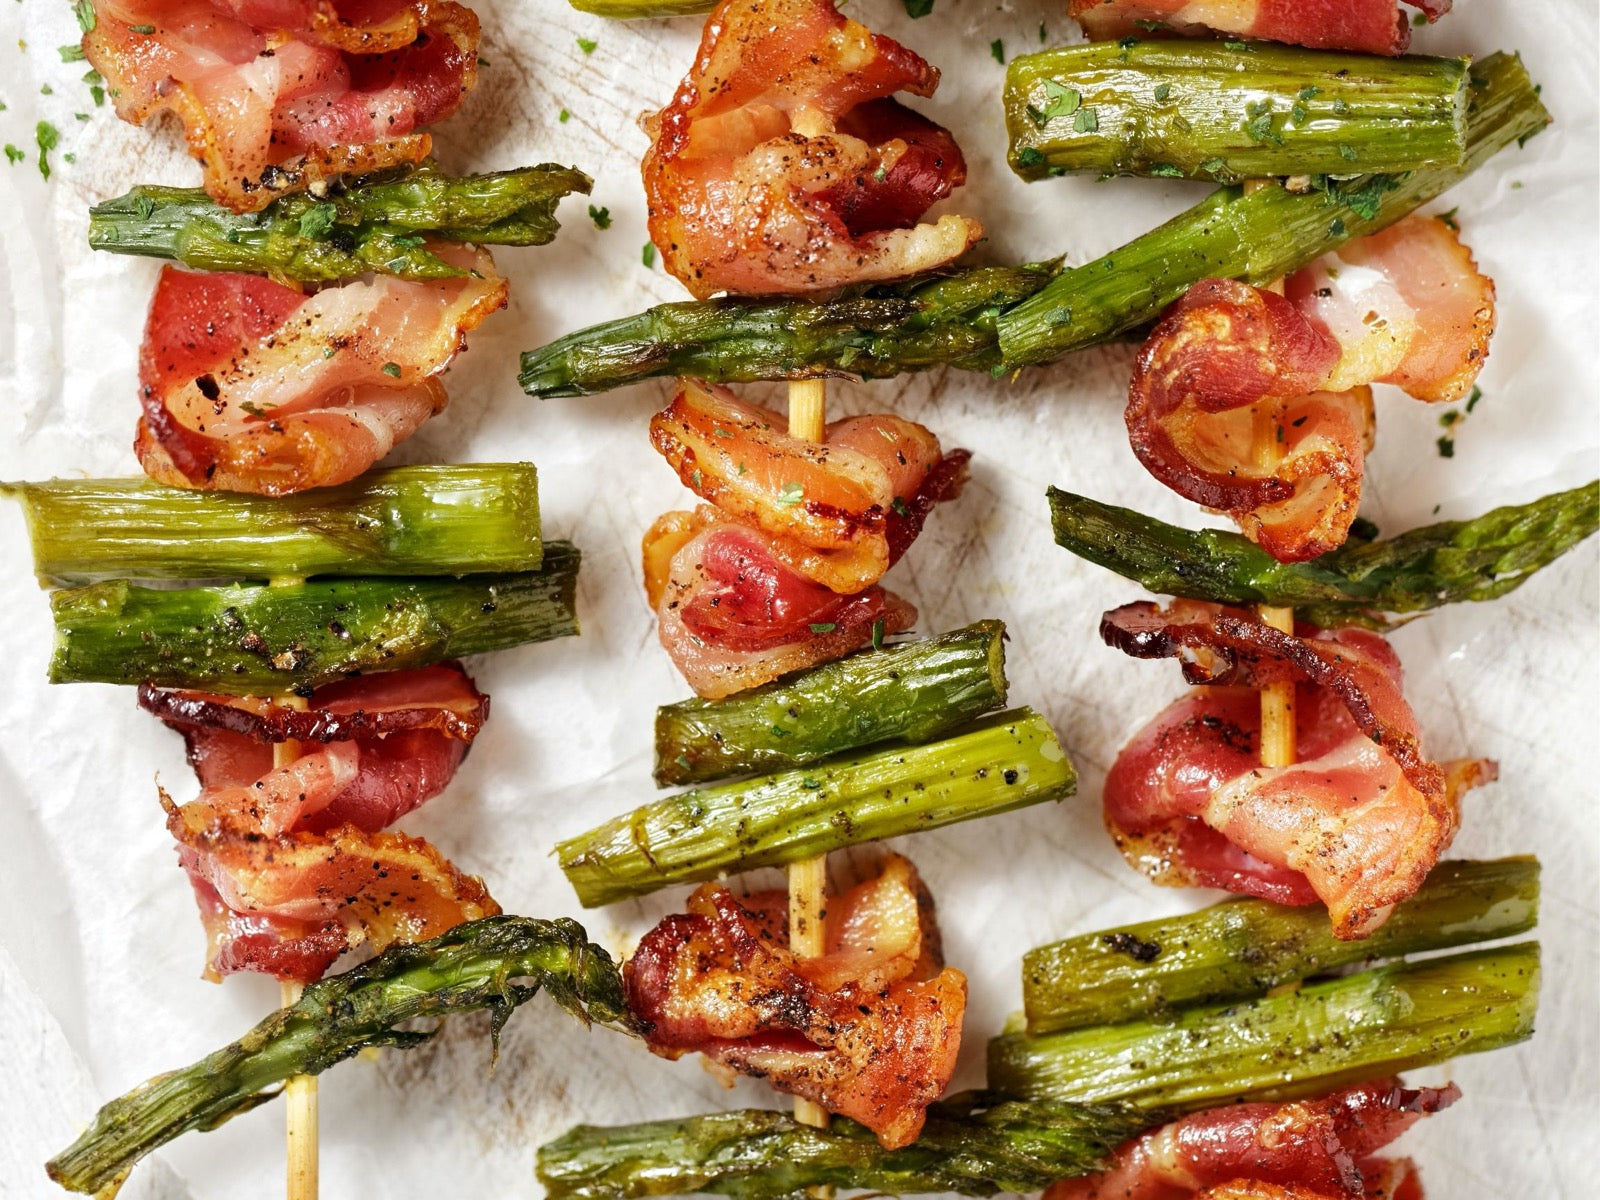 Duck Bacon & Sea Scallop Skewers with Grilled Vegetables - Beck & Bulow